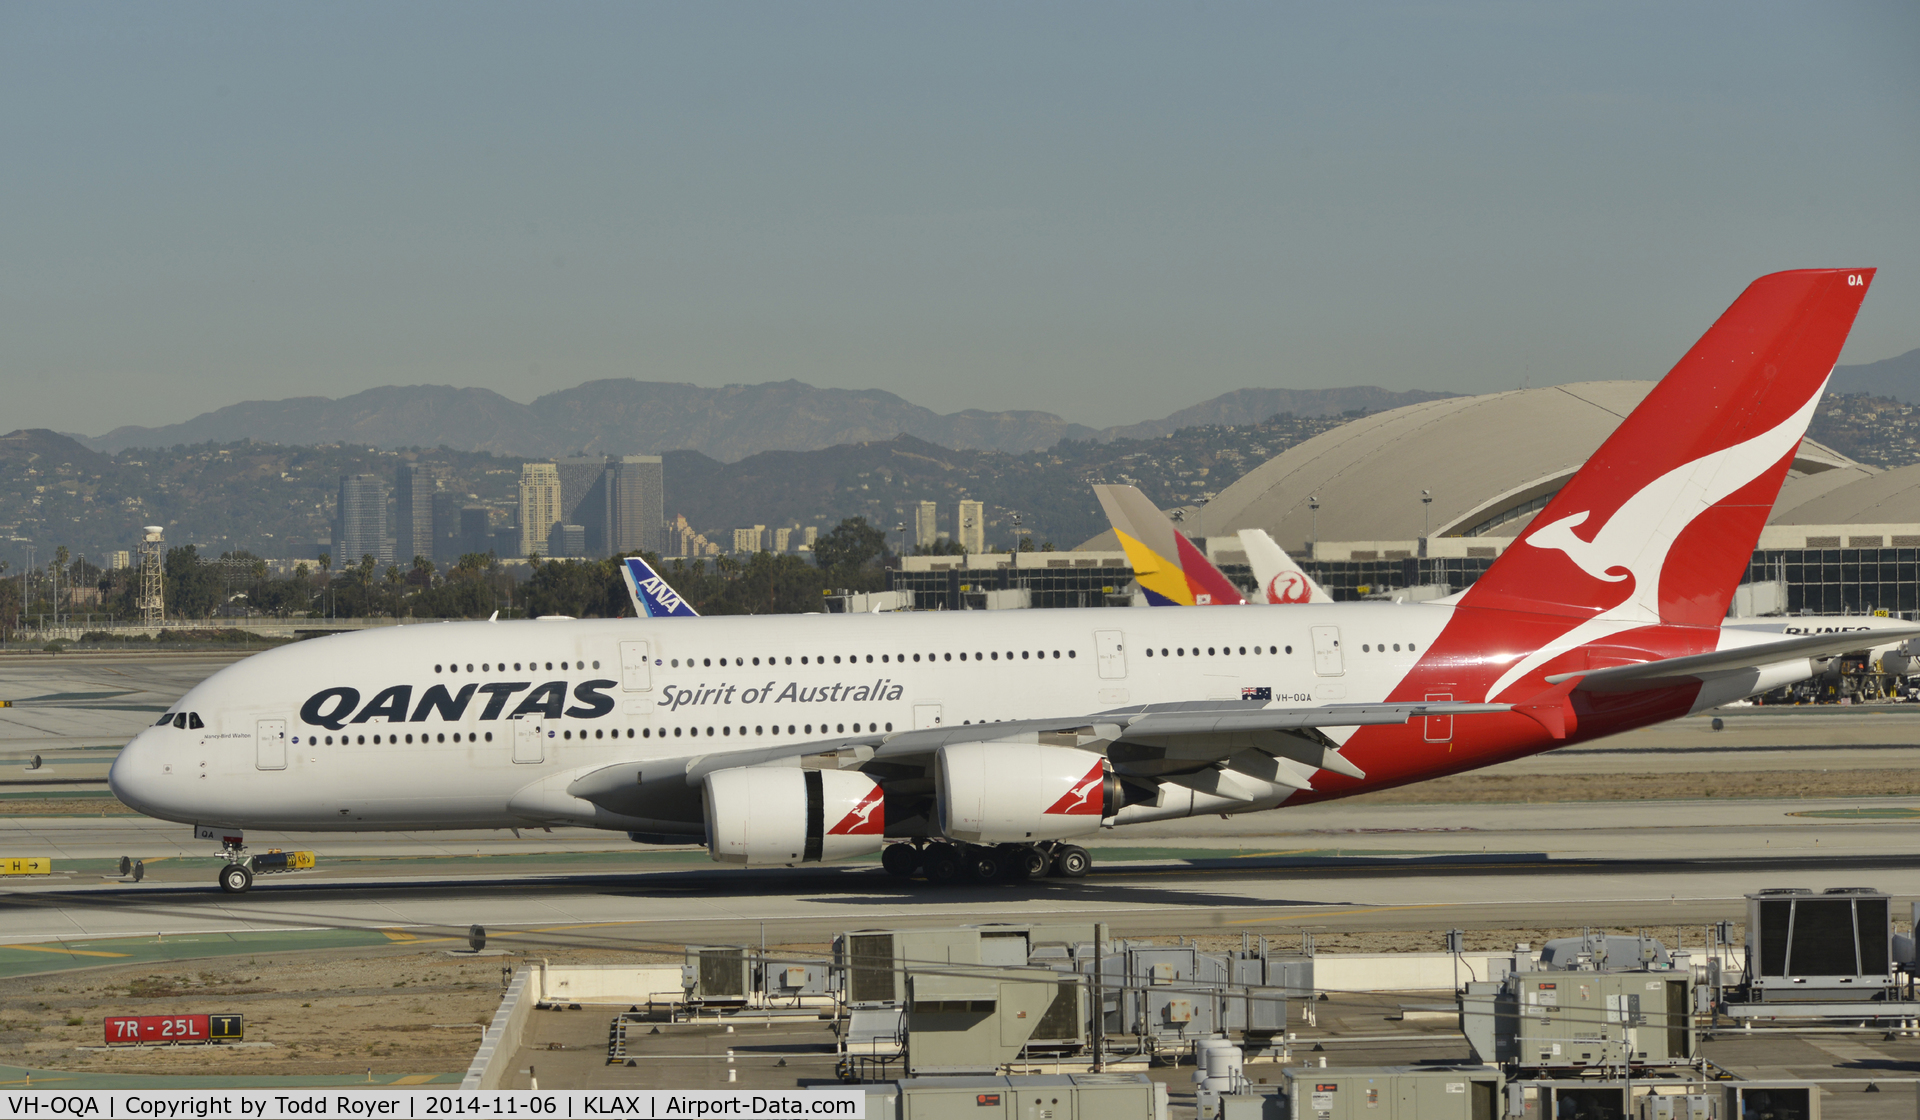 VH-OQA, 2008 Airbus A380-842 C/N 014, Landing on 25L at LAX